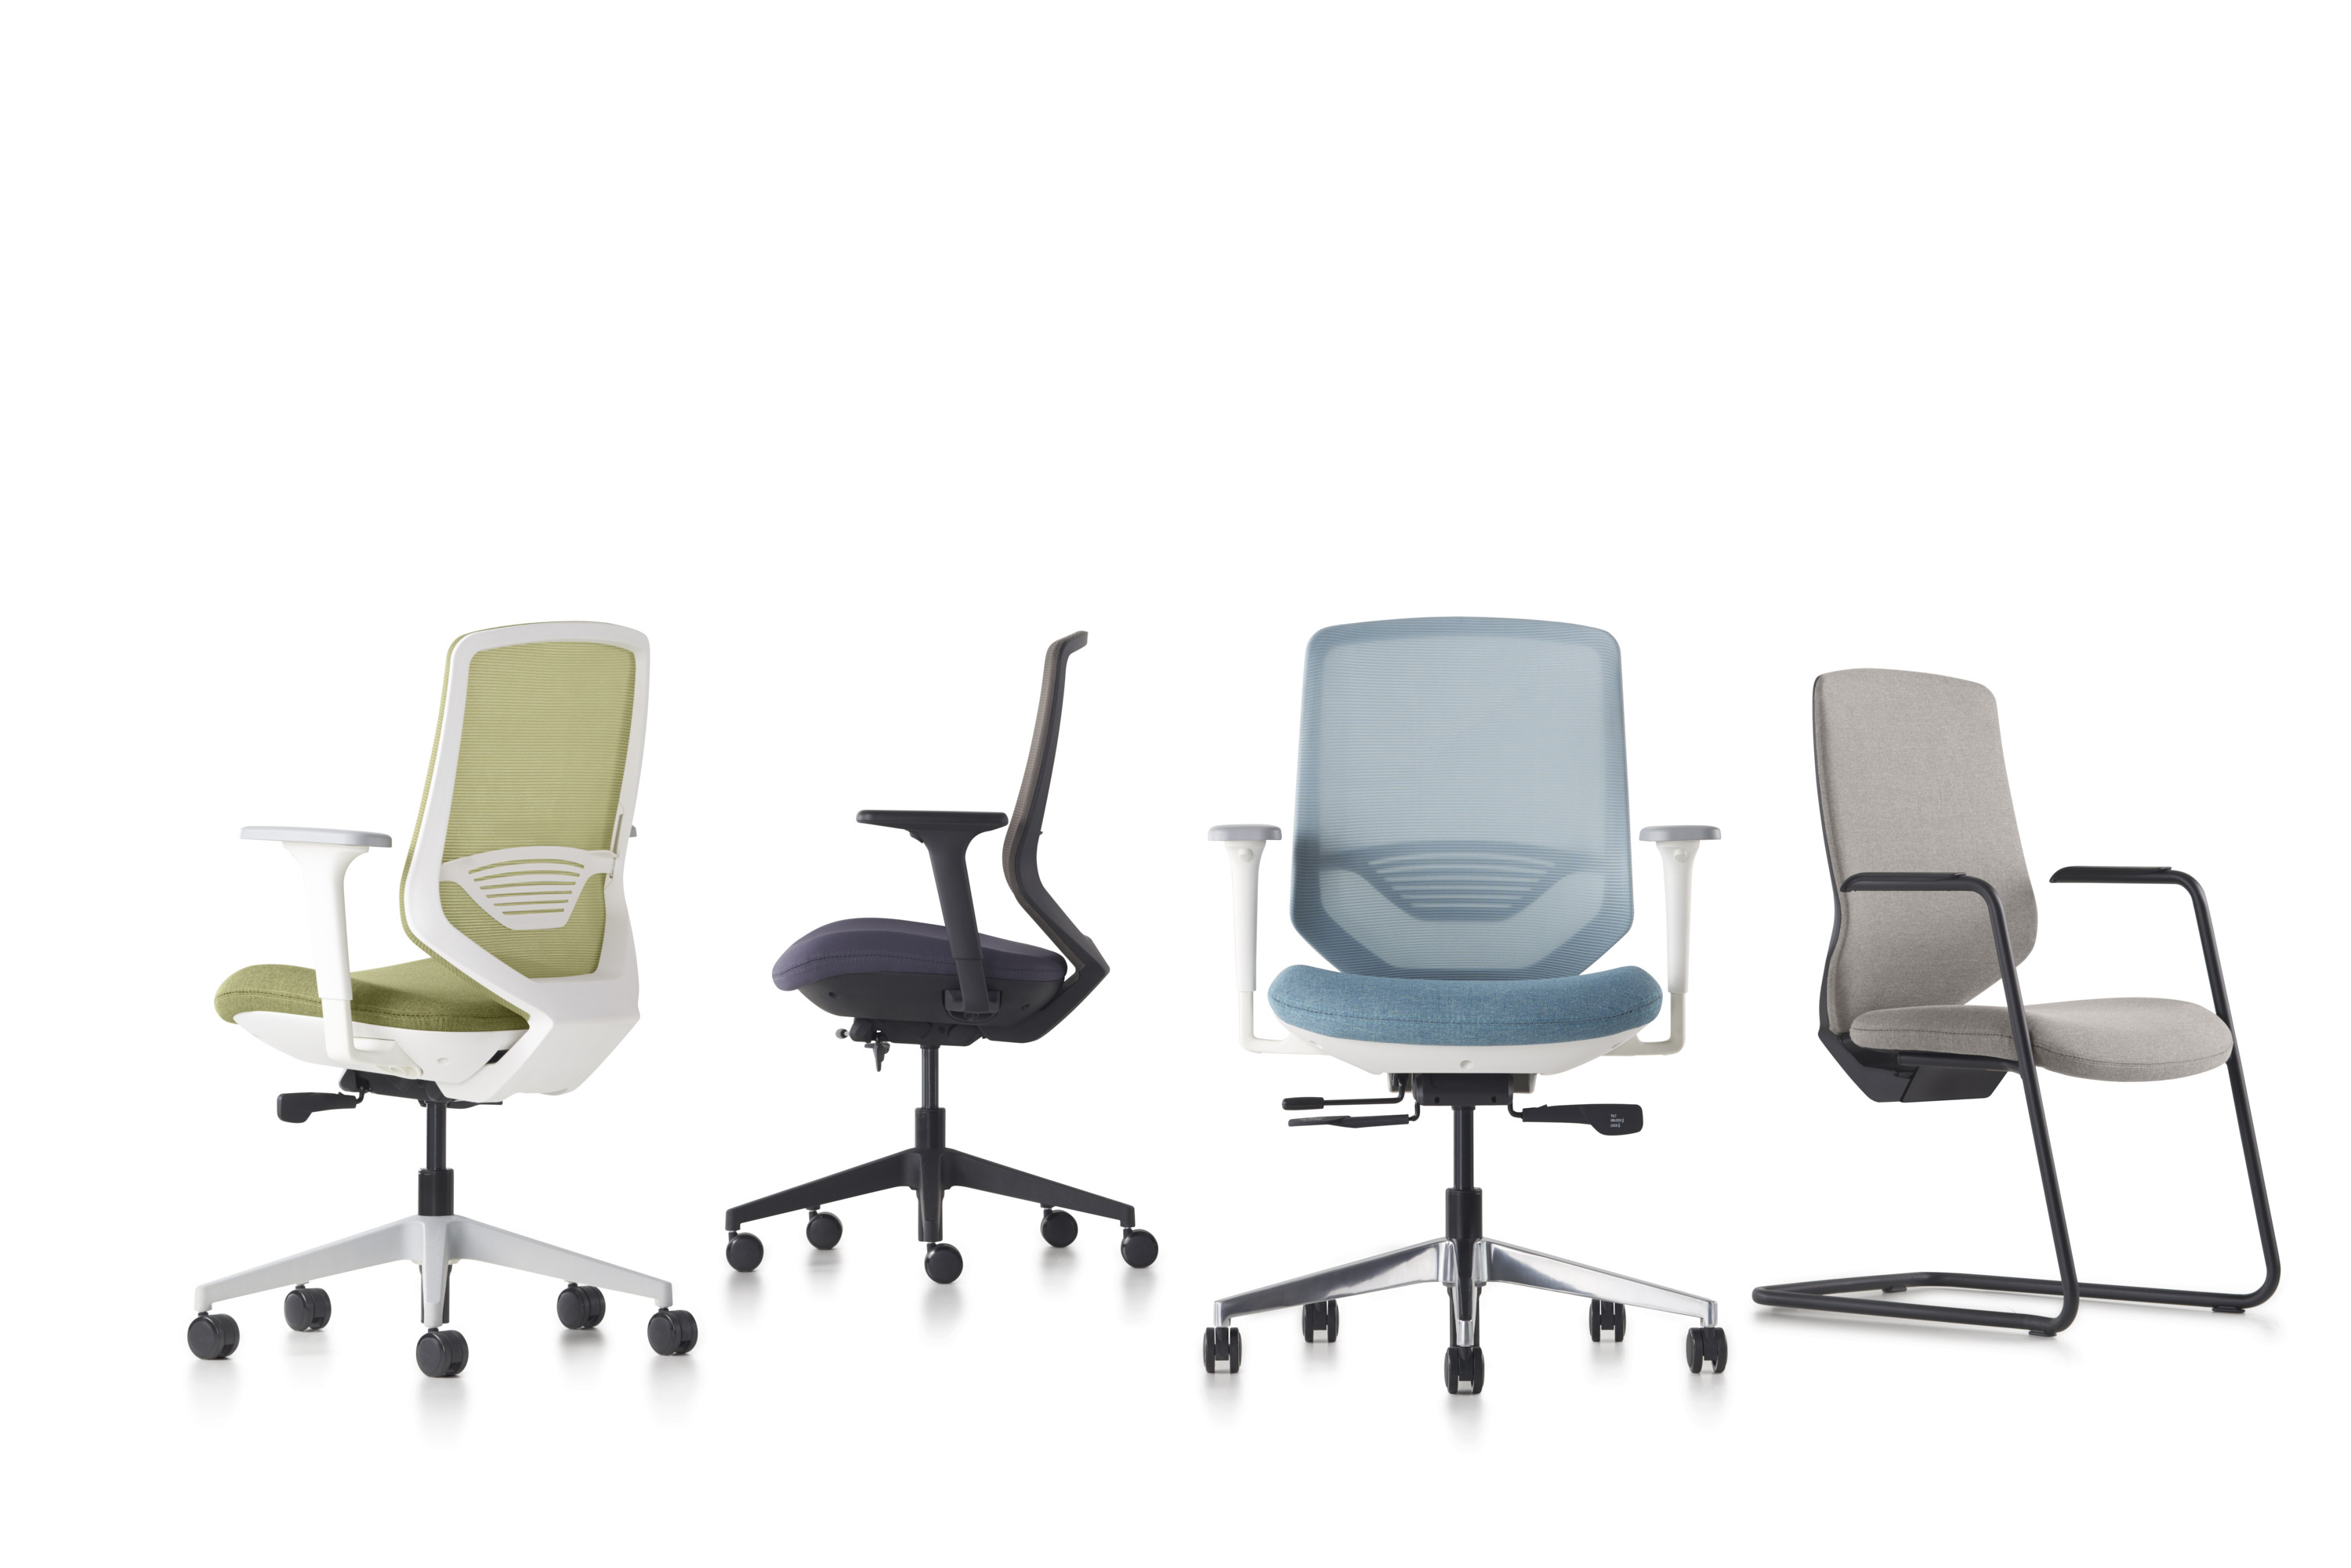 POSH Express 2 Product Images - Office Chairs - Herman Miller